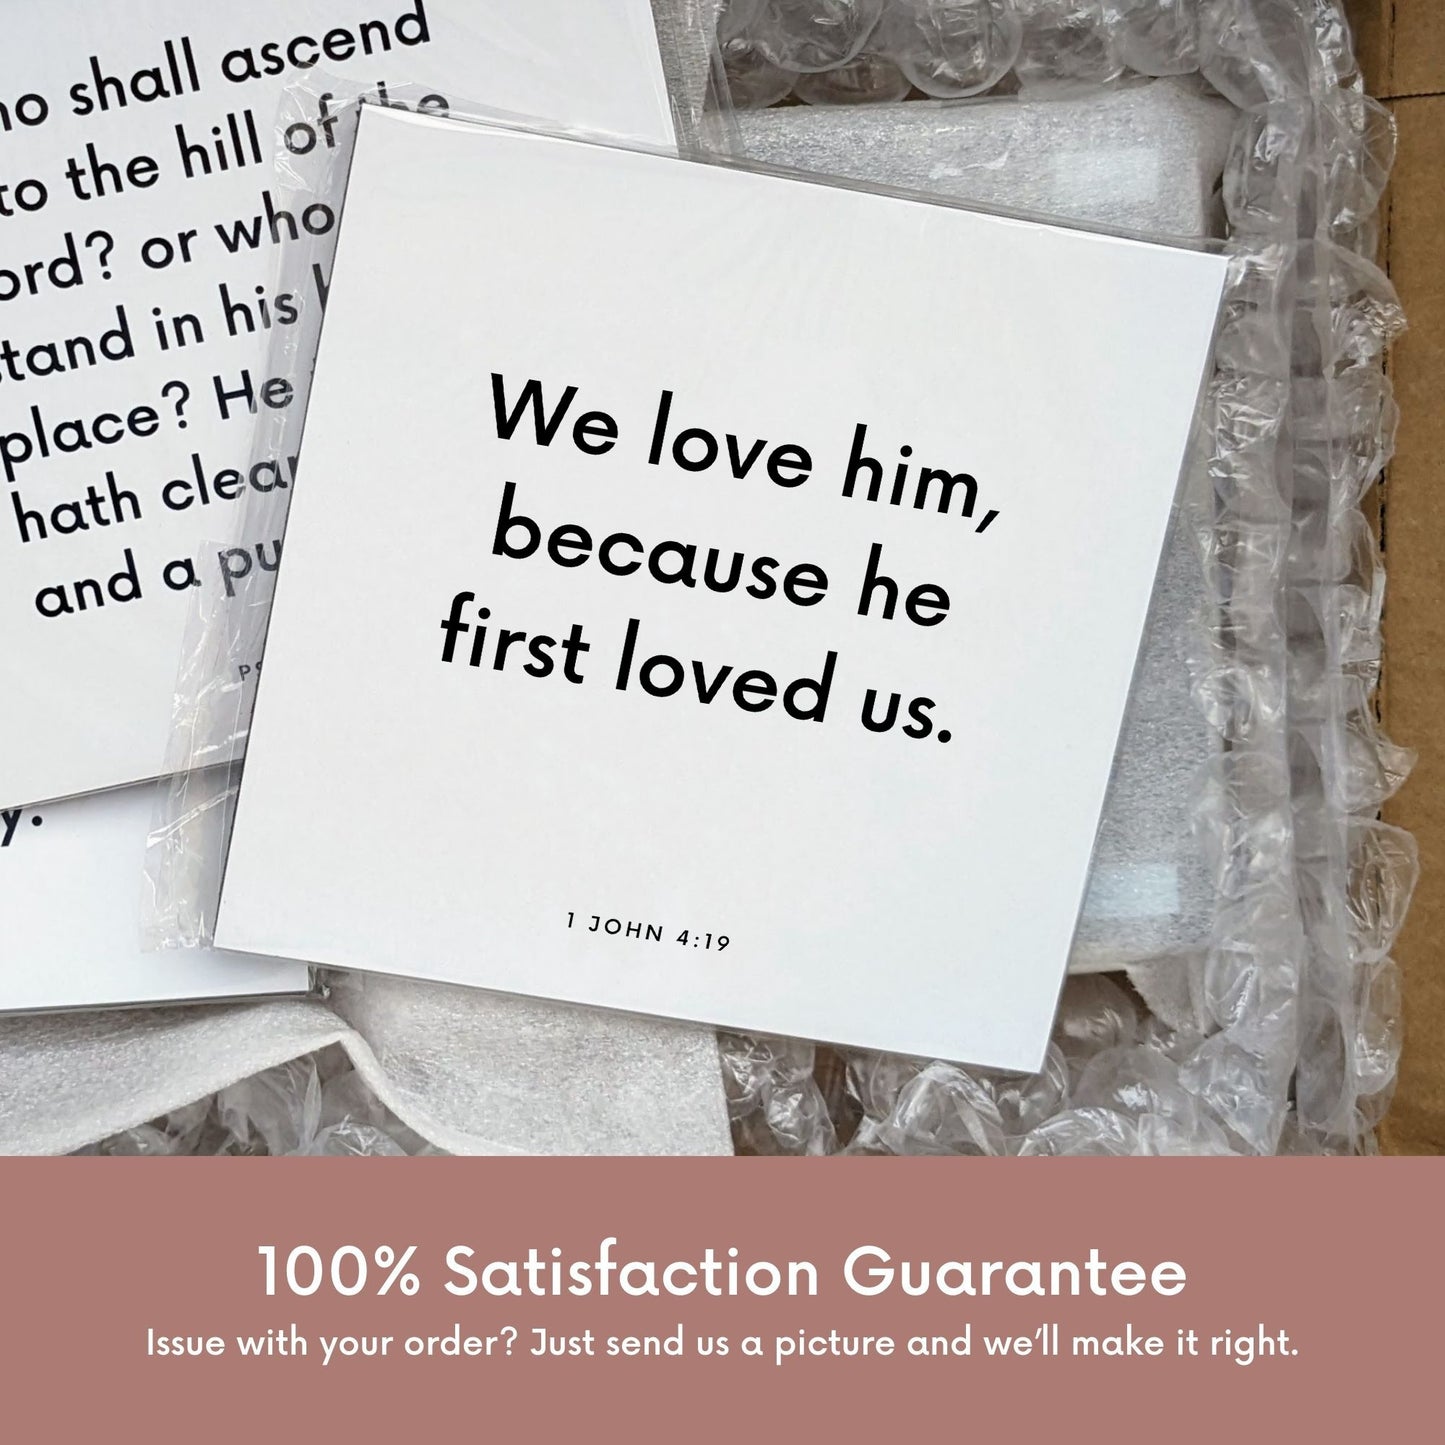 Shipping materials for scripture tile of 1 John 4:19 - "We love him, because he first loved us"